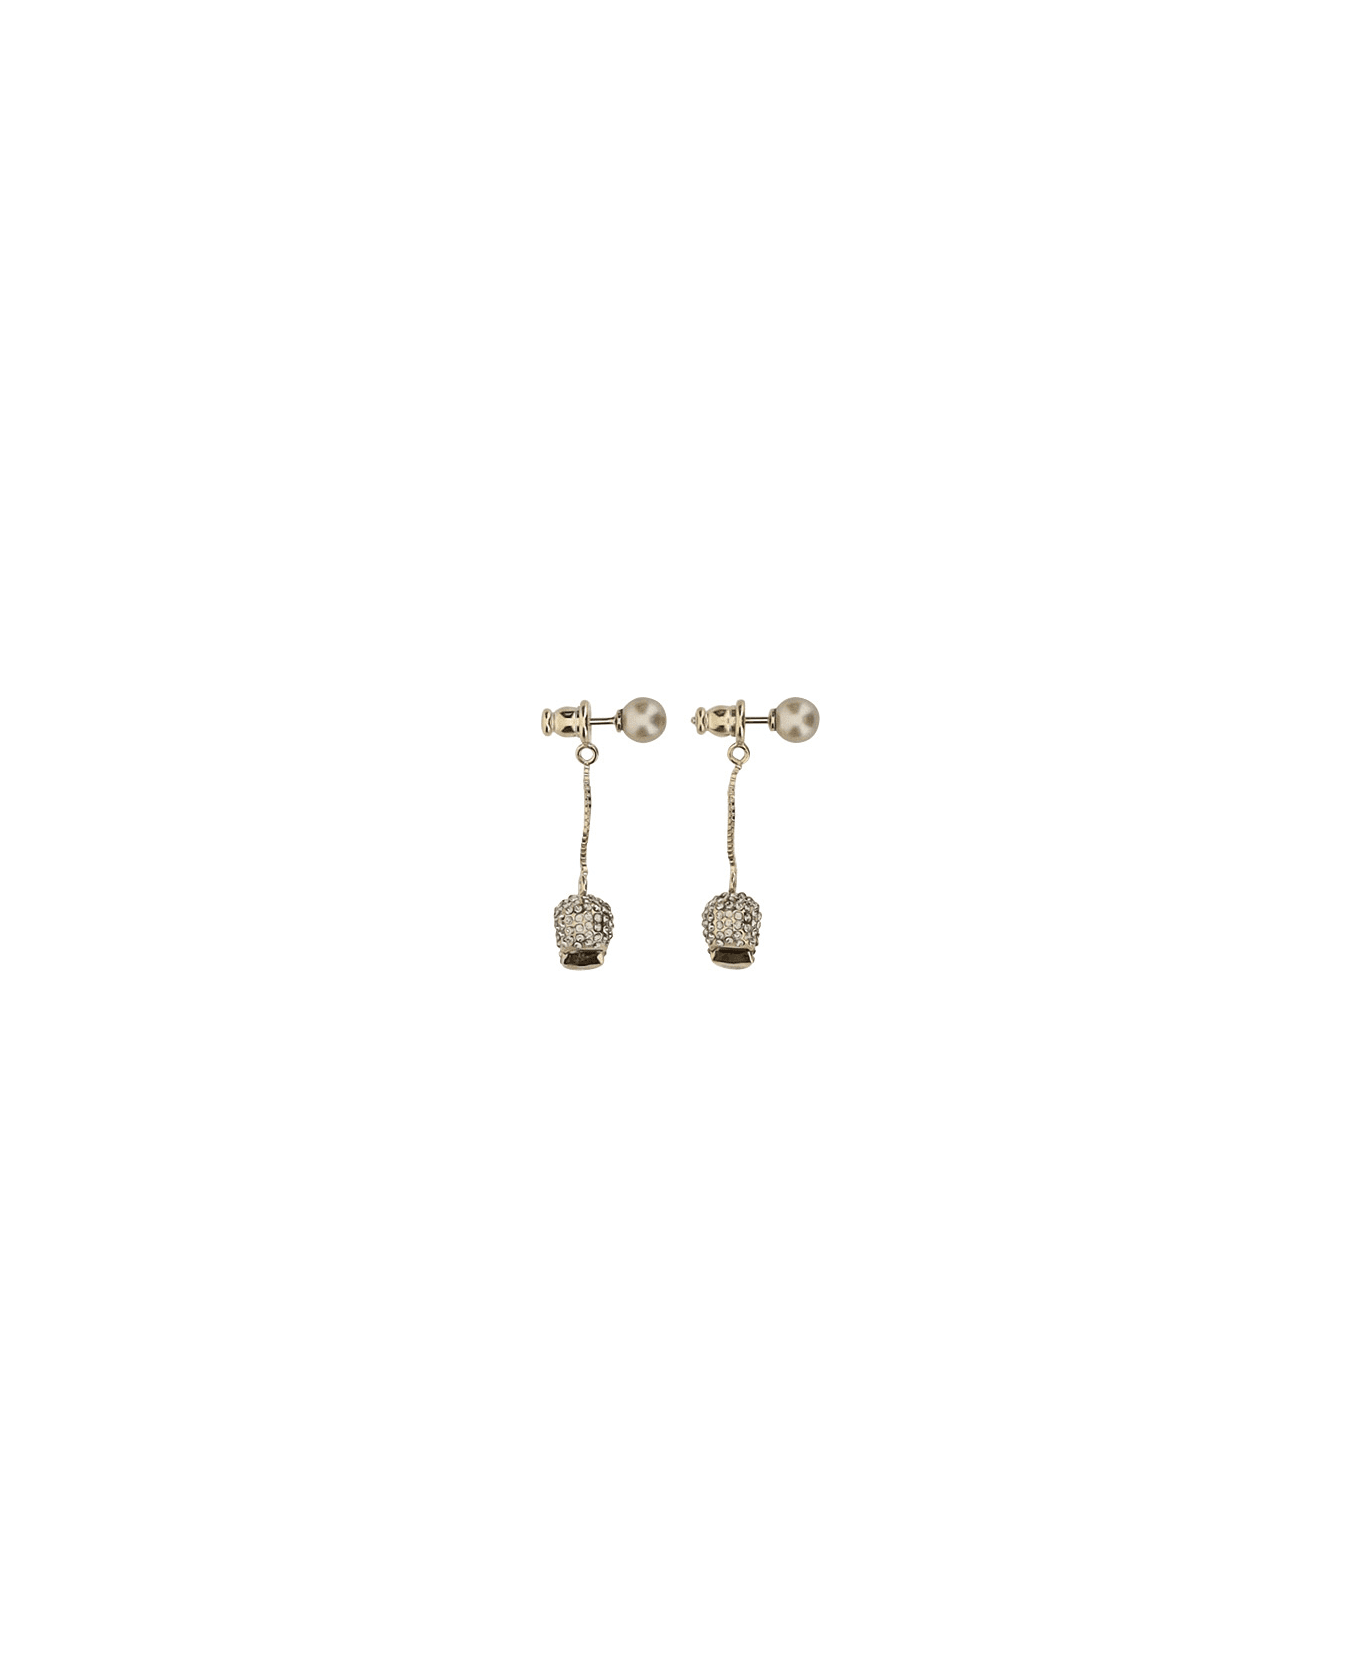 Alexander McQueen Skull Earrings With Pave' And Chain - Oro イヤリング